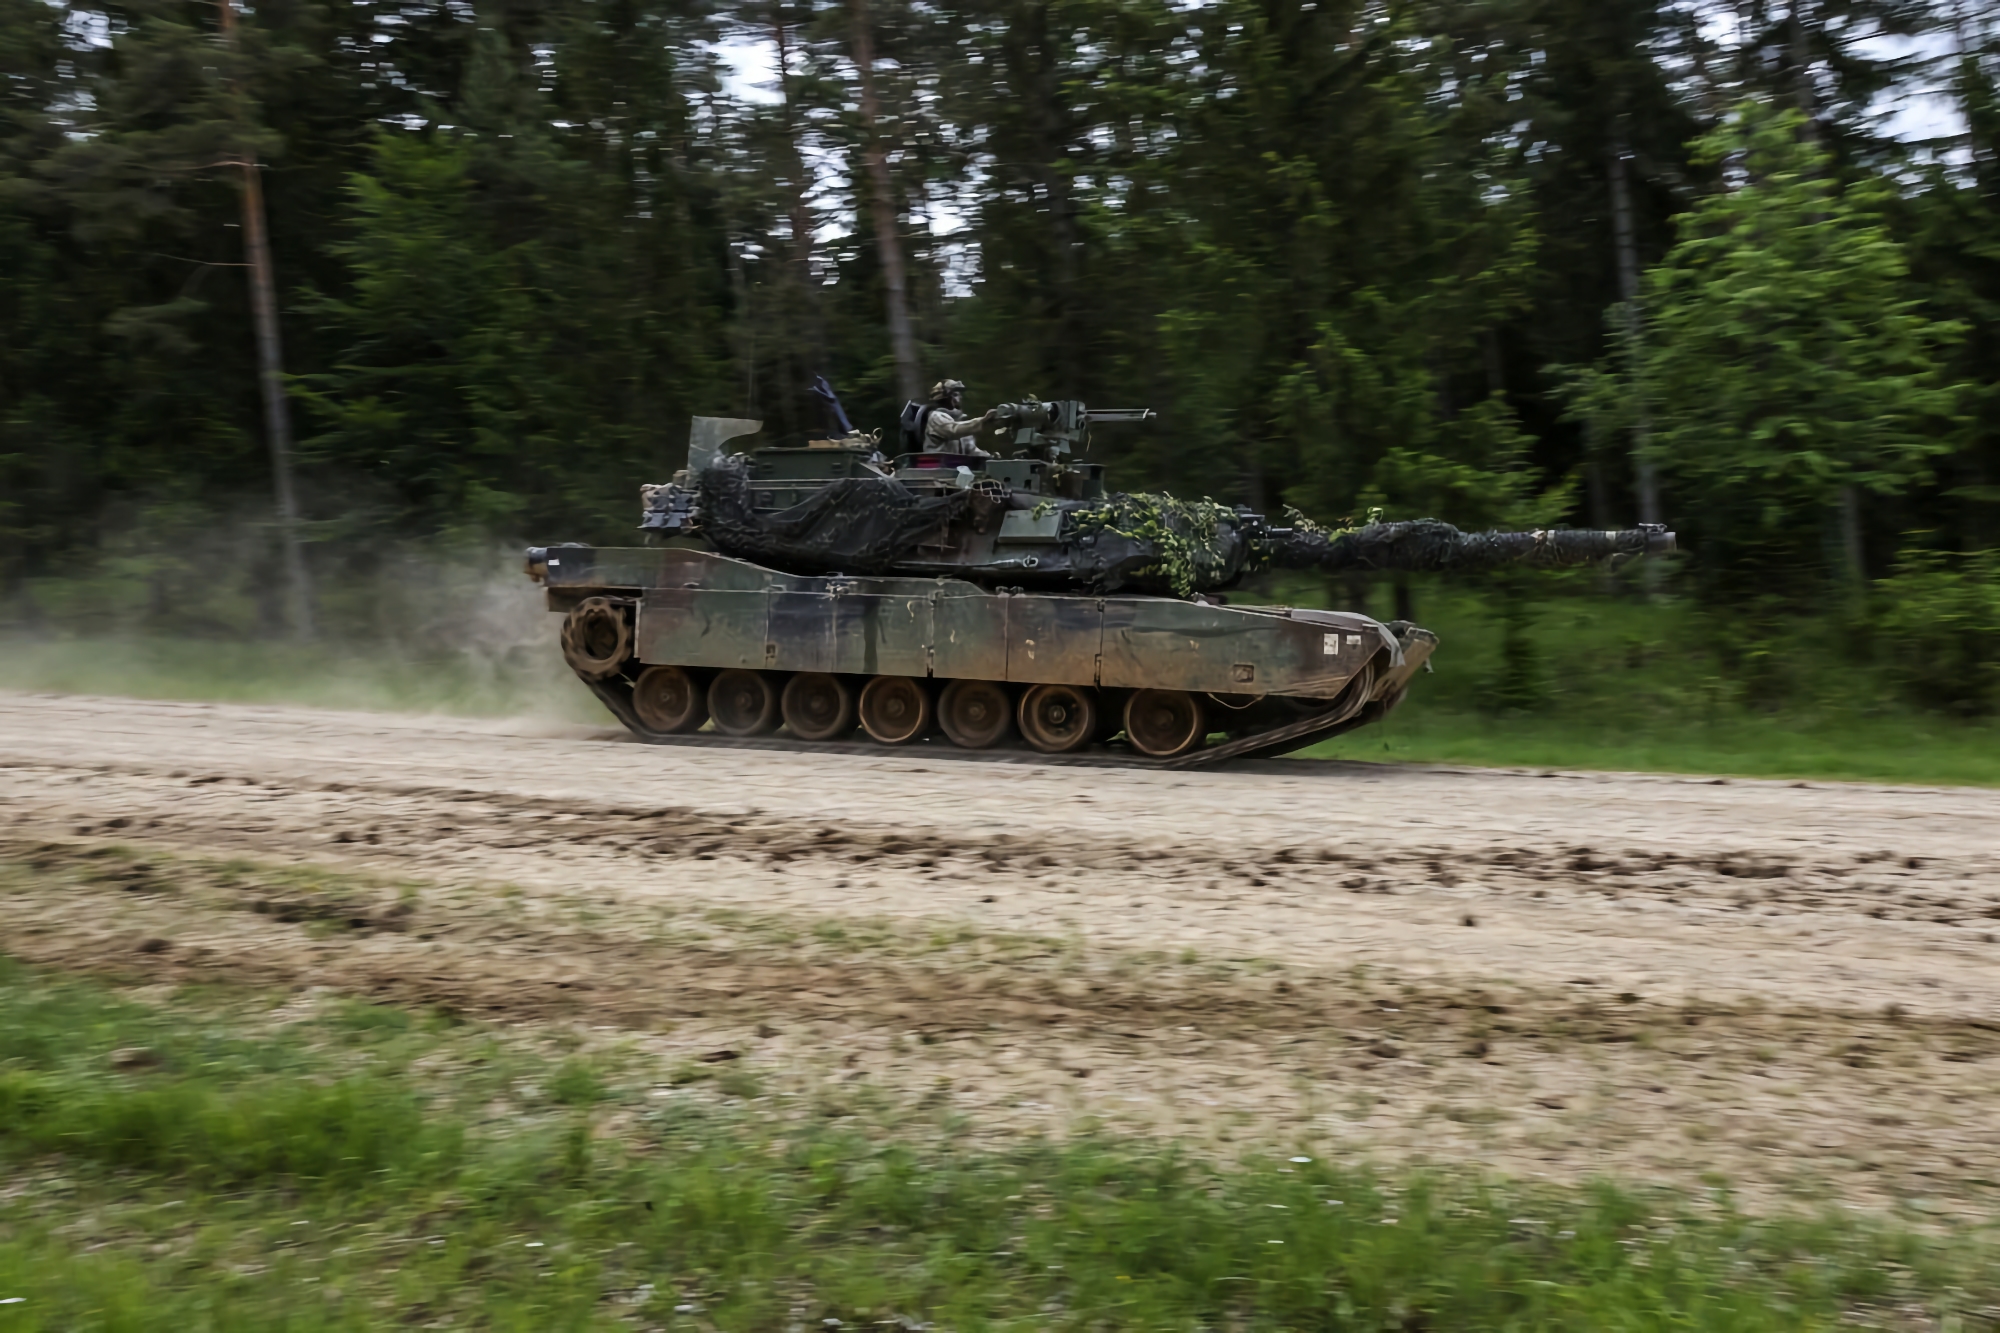 The AFU showed the first footage of the US M1 Abrams tank in action